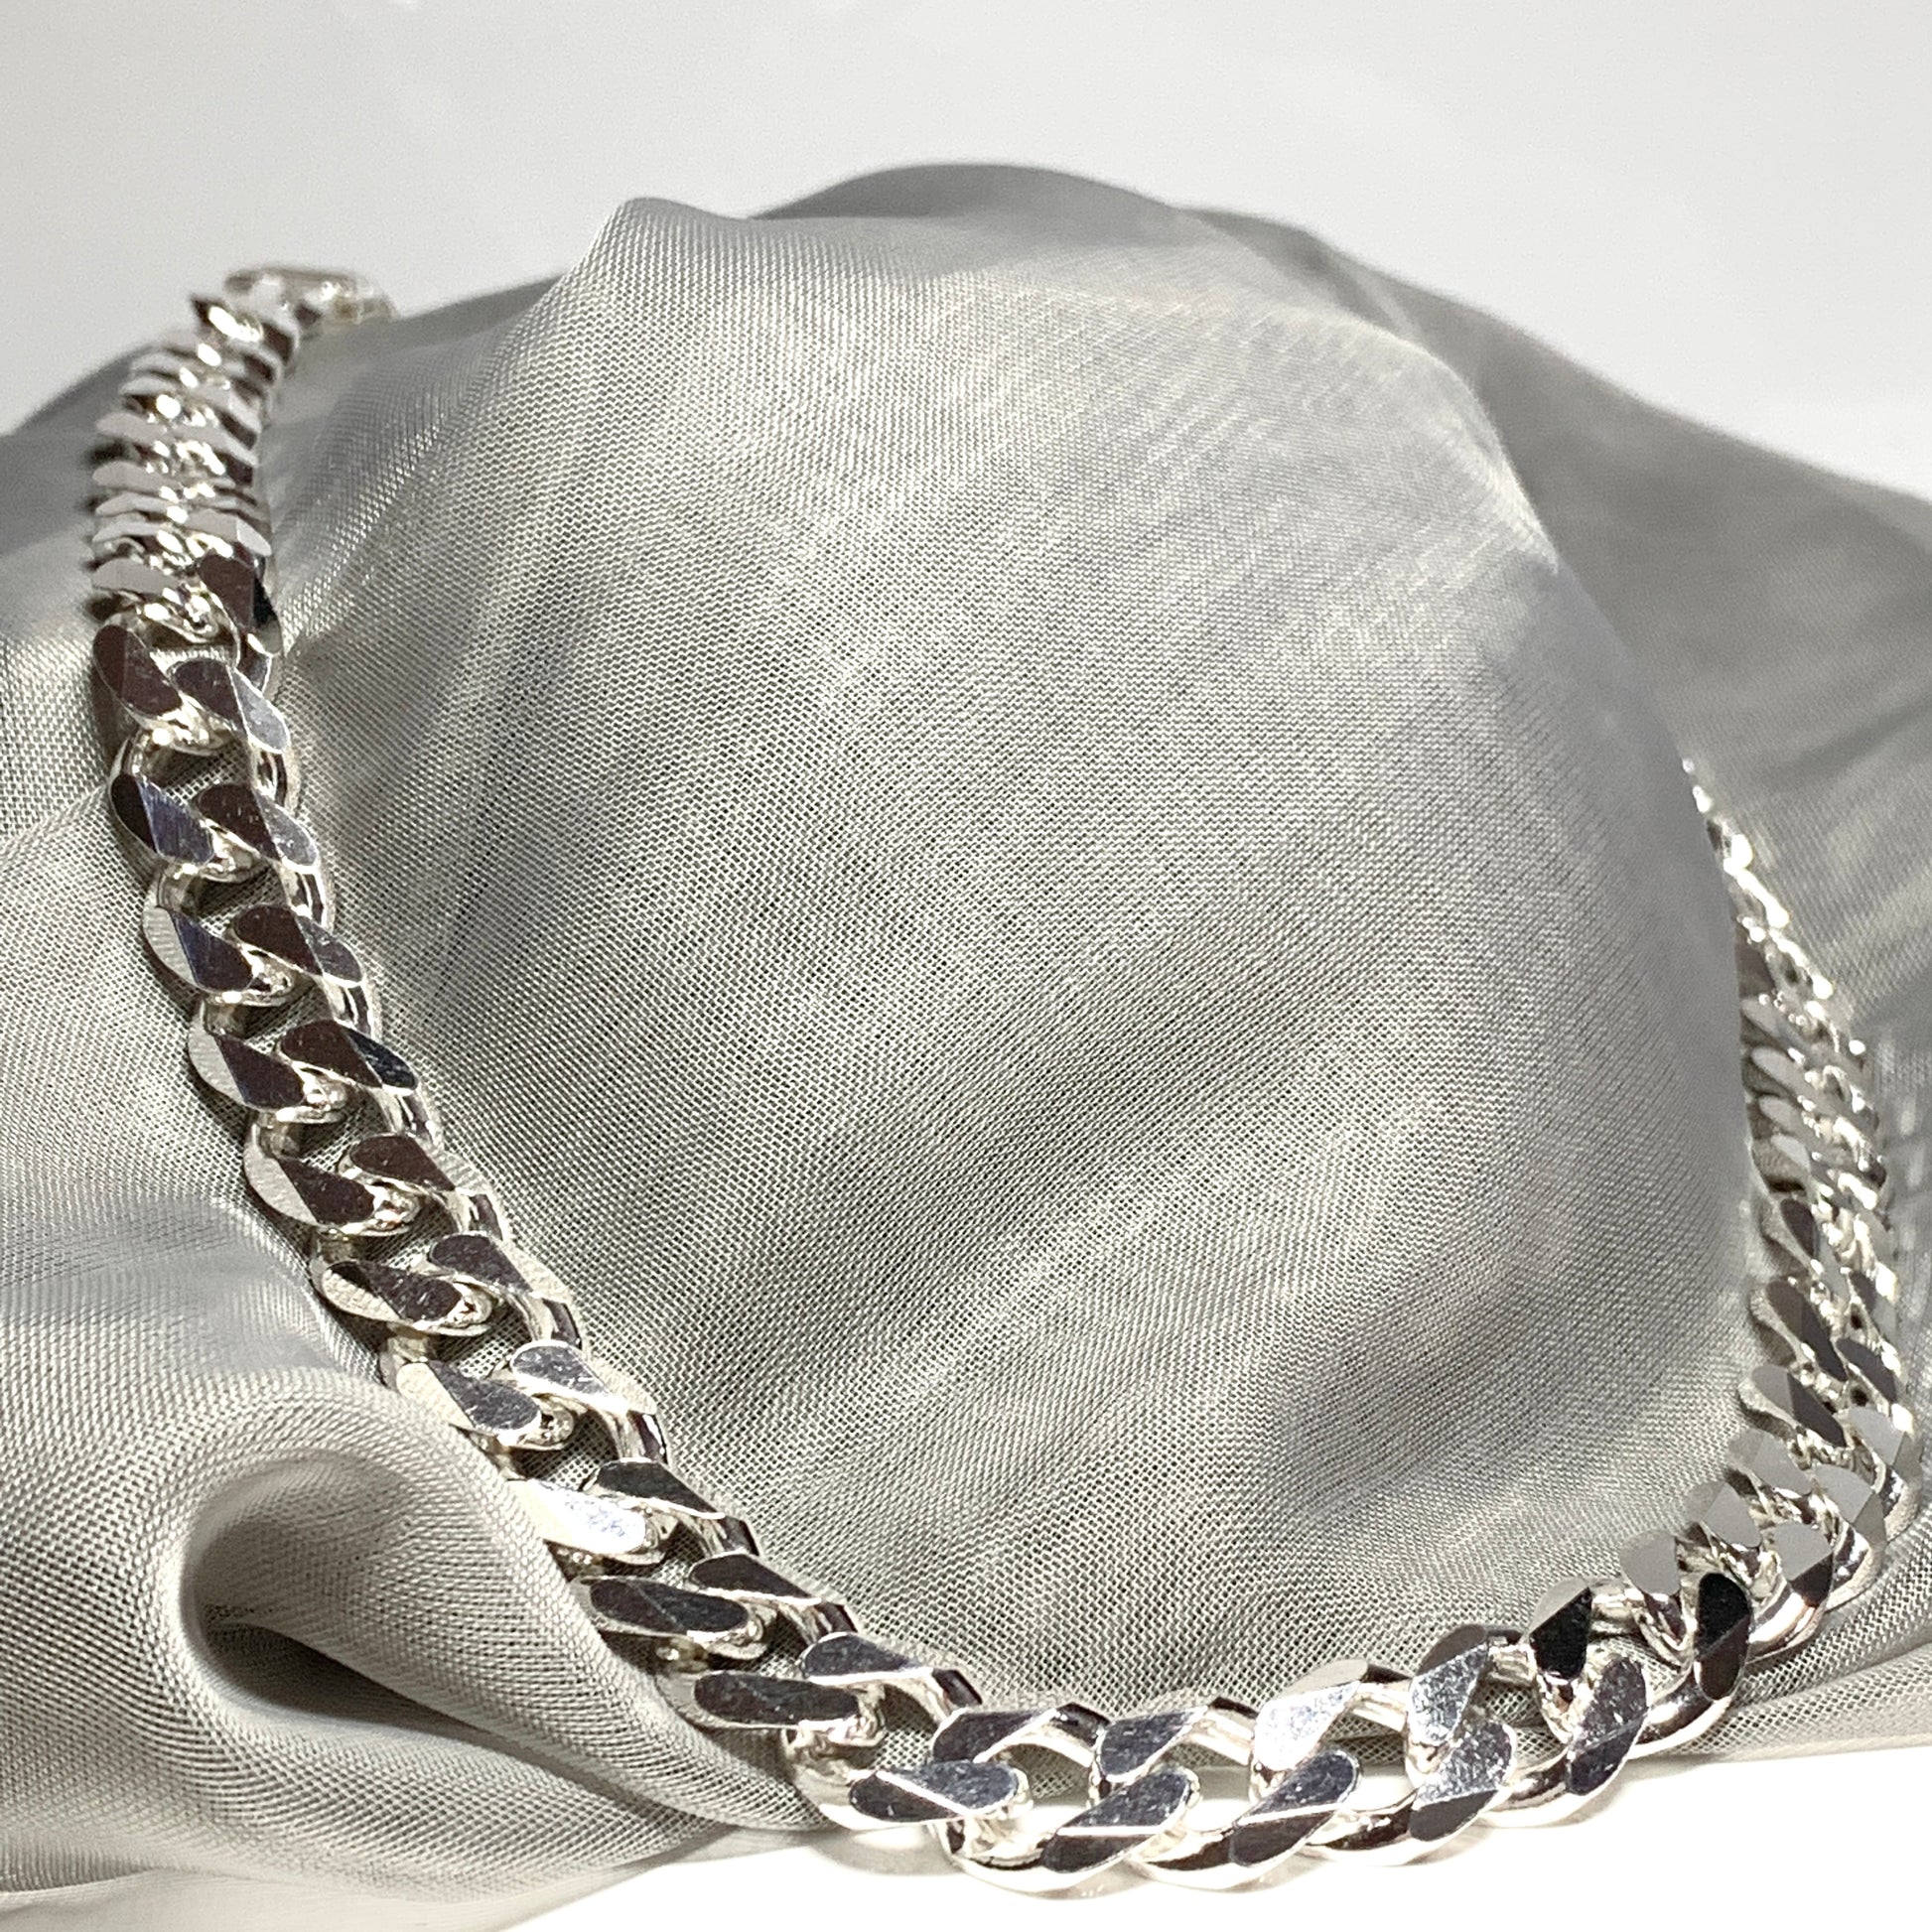 Men's solid 100g sterling silver extra heavyweight 20 inch curb necklace